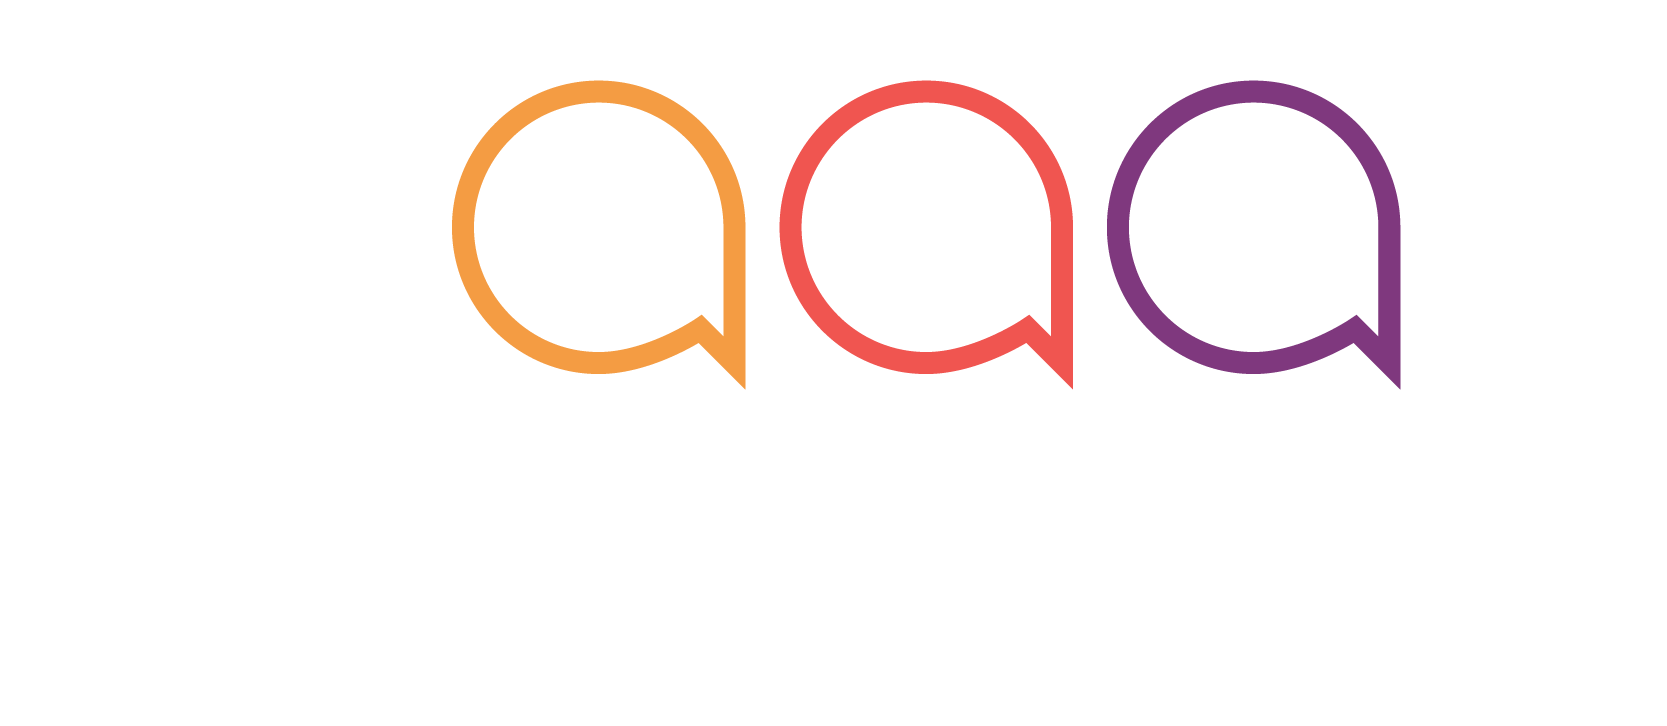 The Financial Advice Association Australia (FAAA) is the leading professional association for the financial advice profession, and advocates for the interests of financial advisers and their clients across the country.